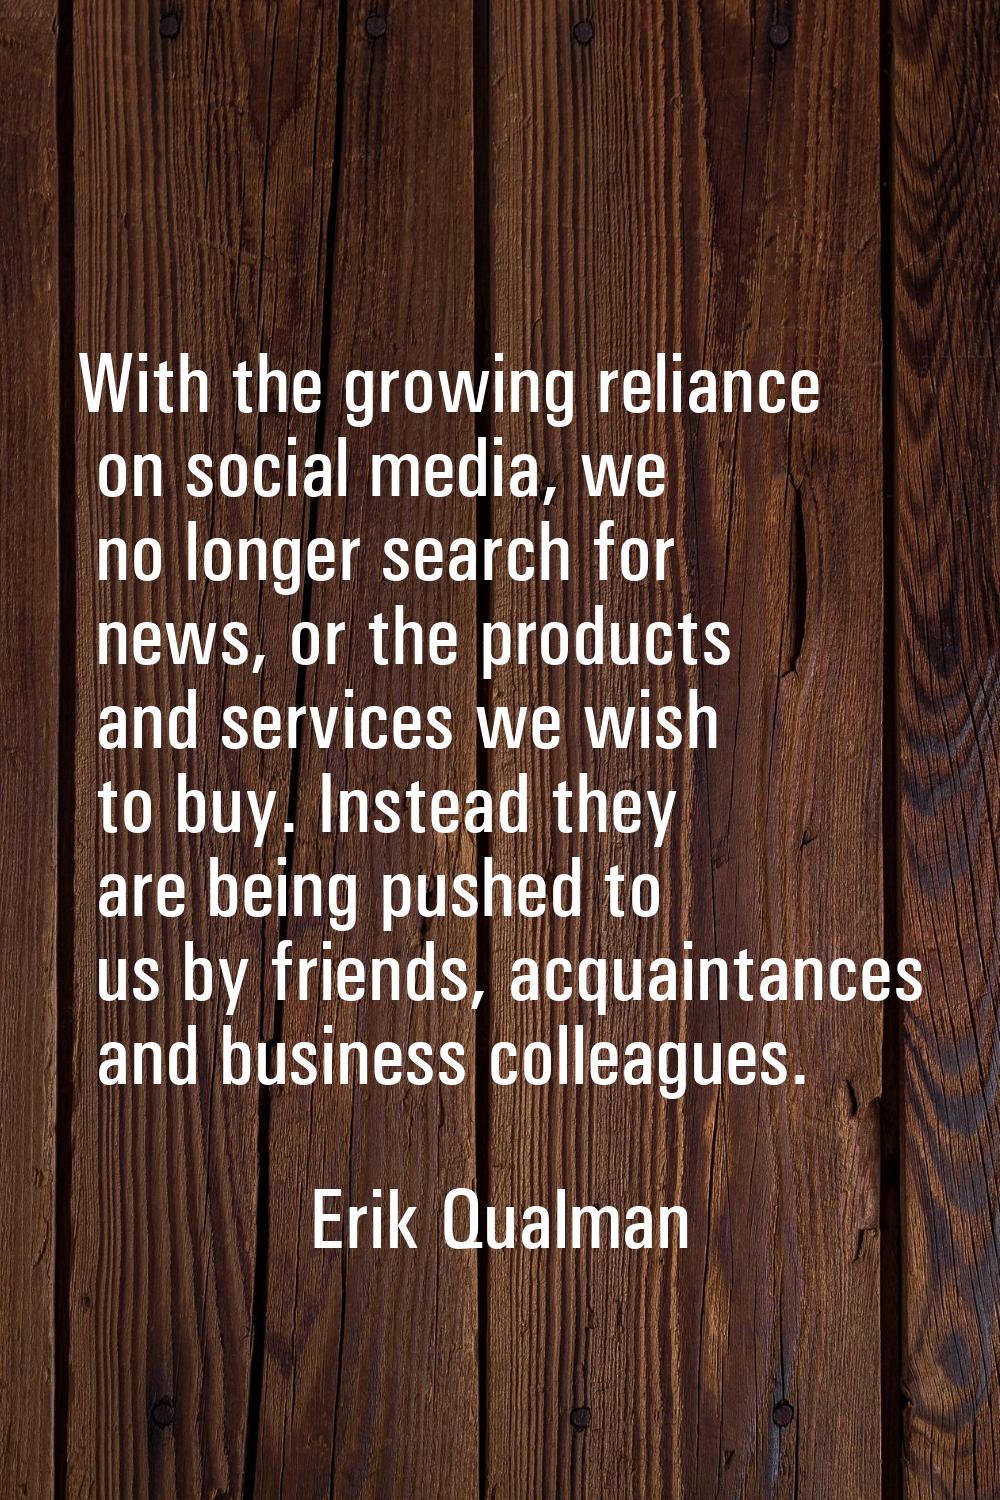 With the growing reliance on social media, we no longer search for news, or the products and servic